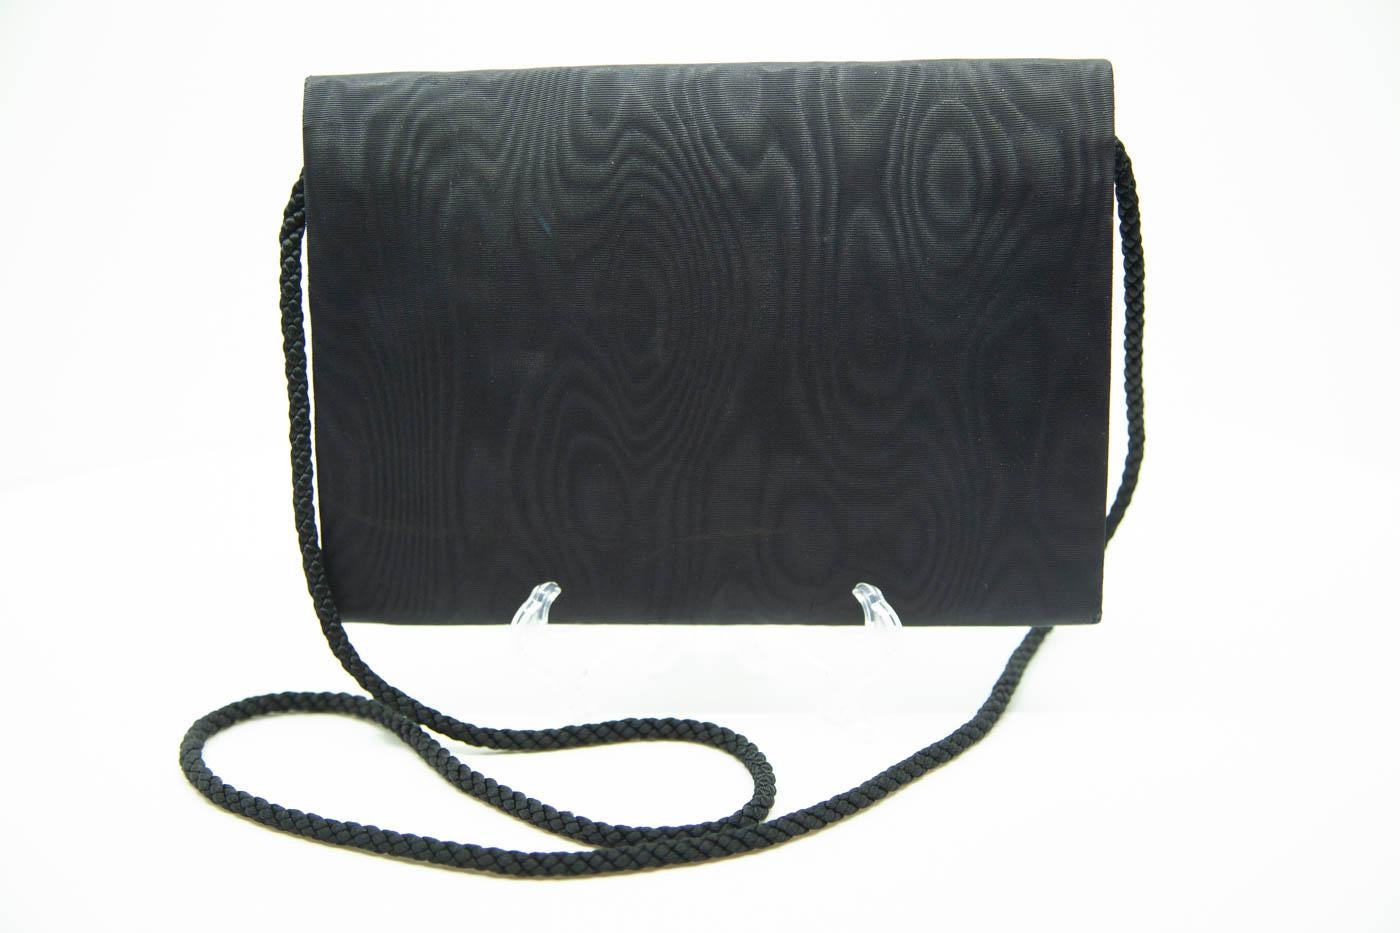 Paloma Picasso envelope purse for that very important letter or credit card. Narrow and small. Black envelope style with red circle at closure.

8